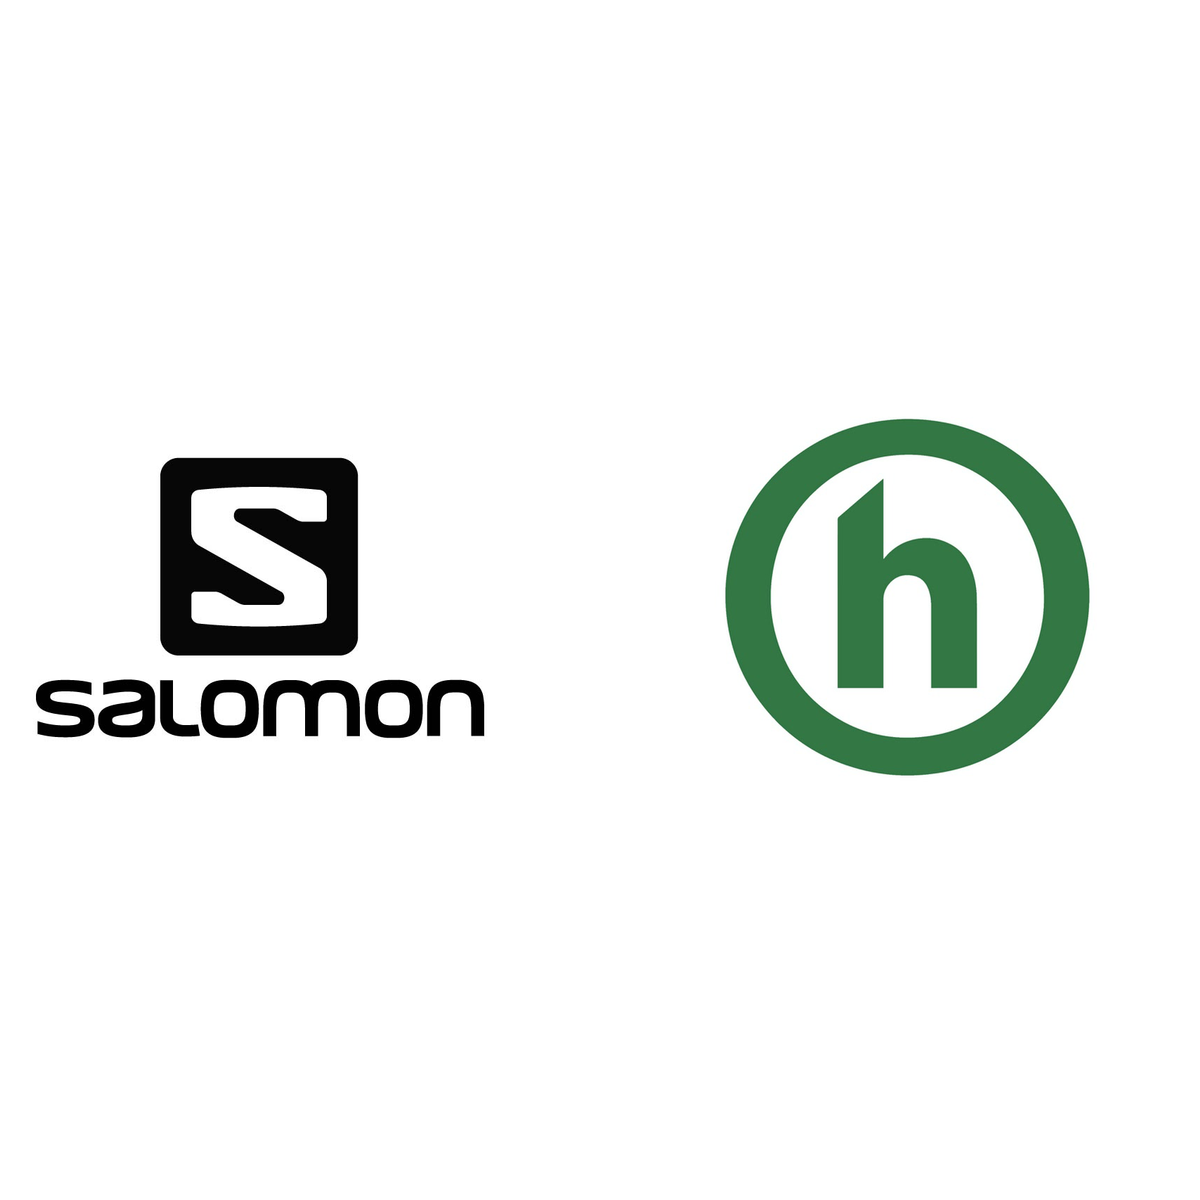 Salomon’s Takeover Continues In 2022 with HIDDEN.NY